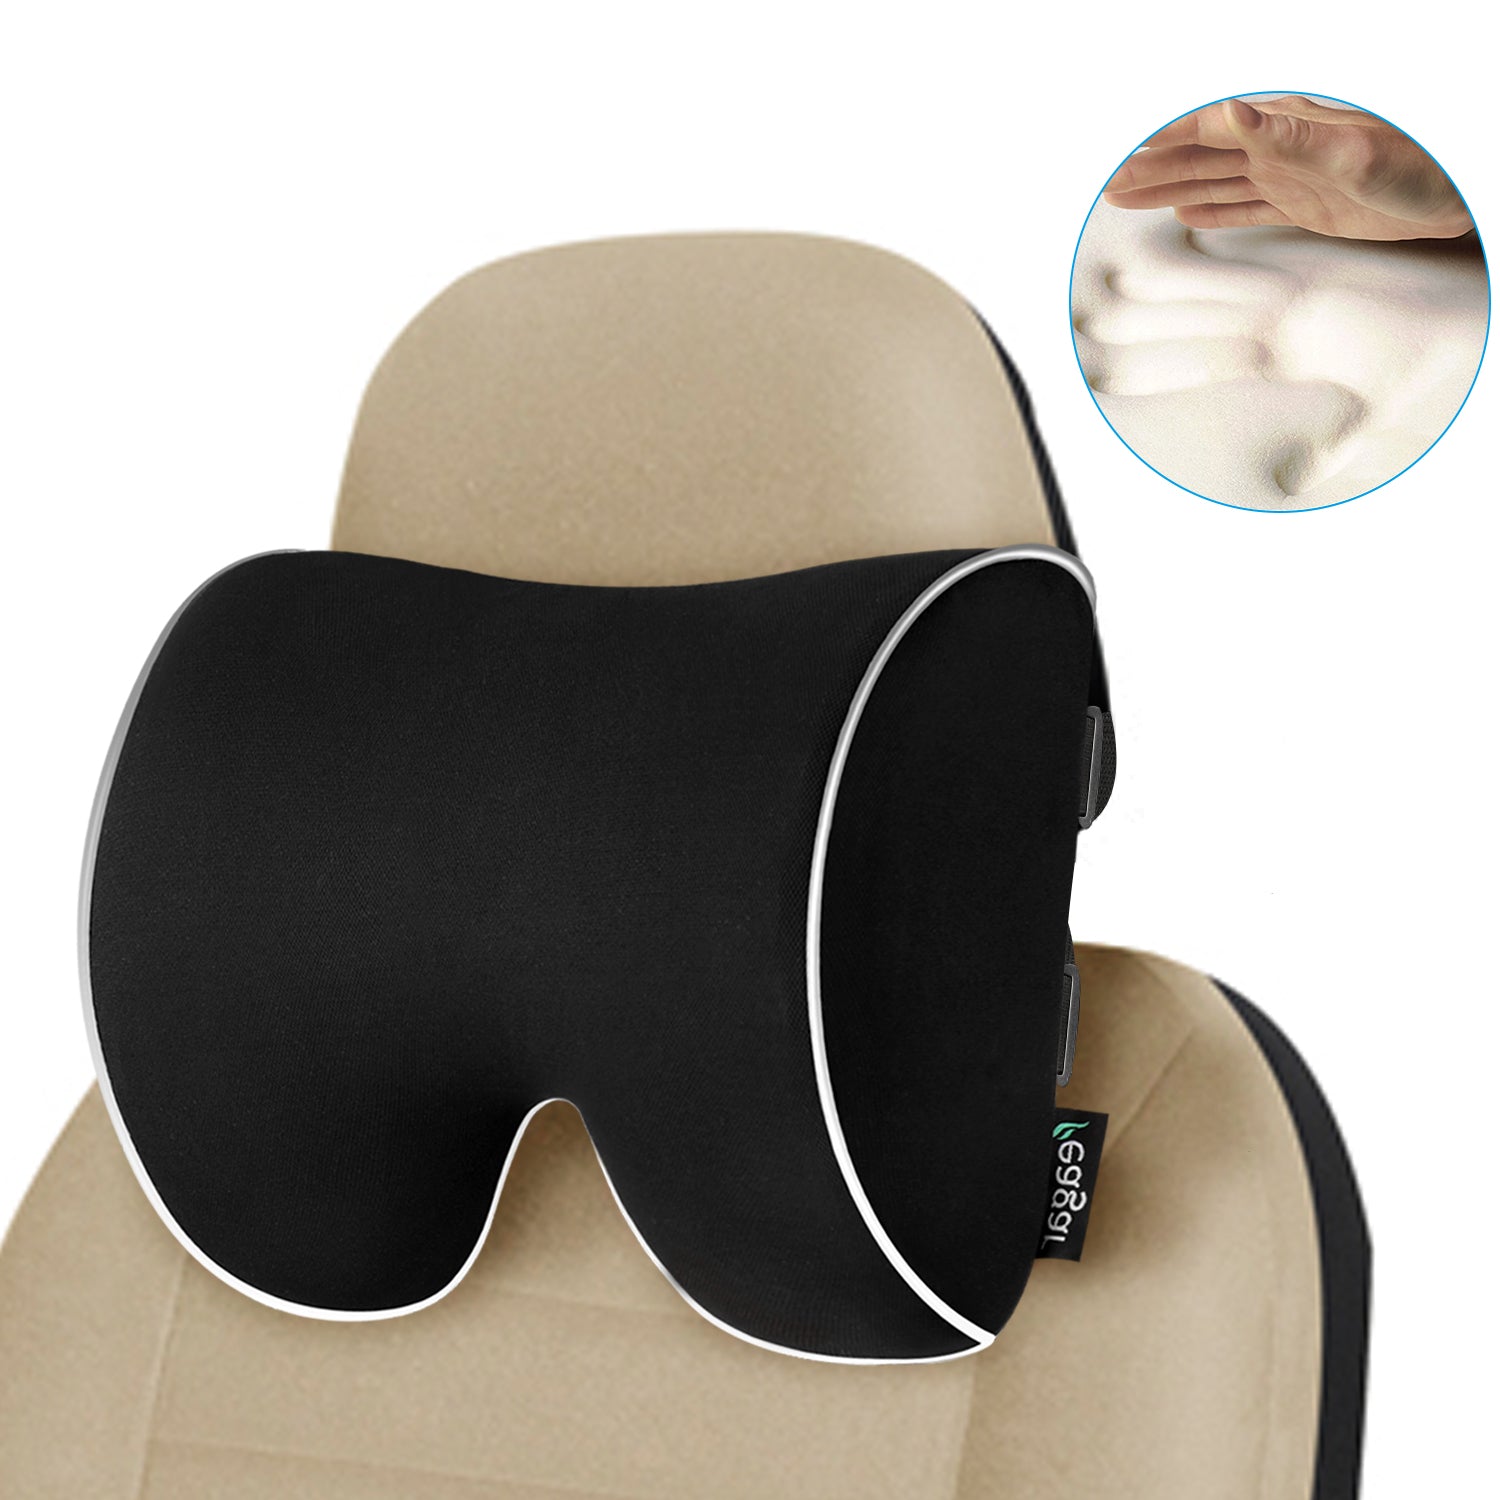 Buy Spurtar Car Headrest Pillow, Soft Velvet Adjustable Head Neck Support,  for Travel and Long Journeys Sleeping, U-shaped Car Safety Pillow for Kids  And Adults Online at Lowest Price Ever in India